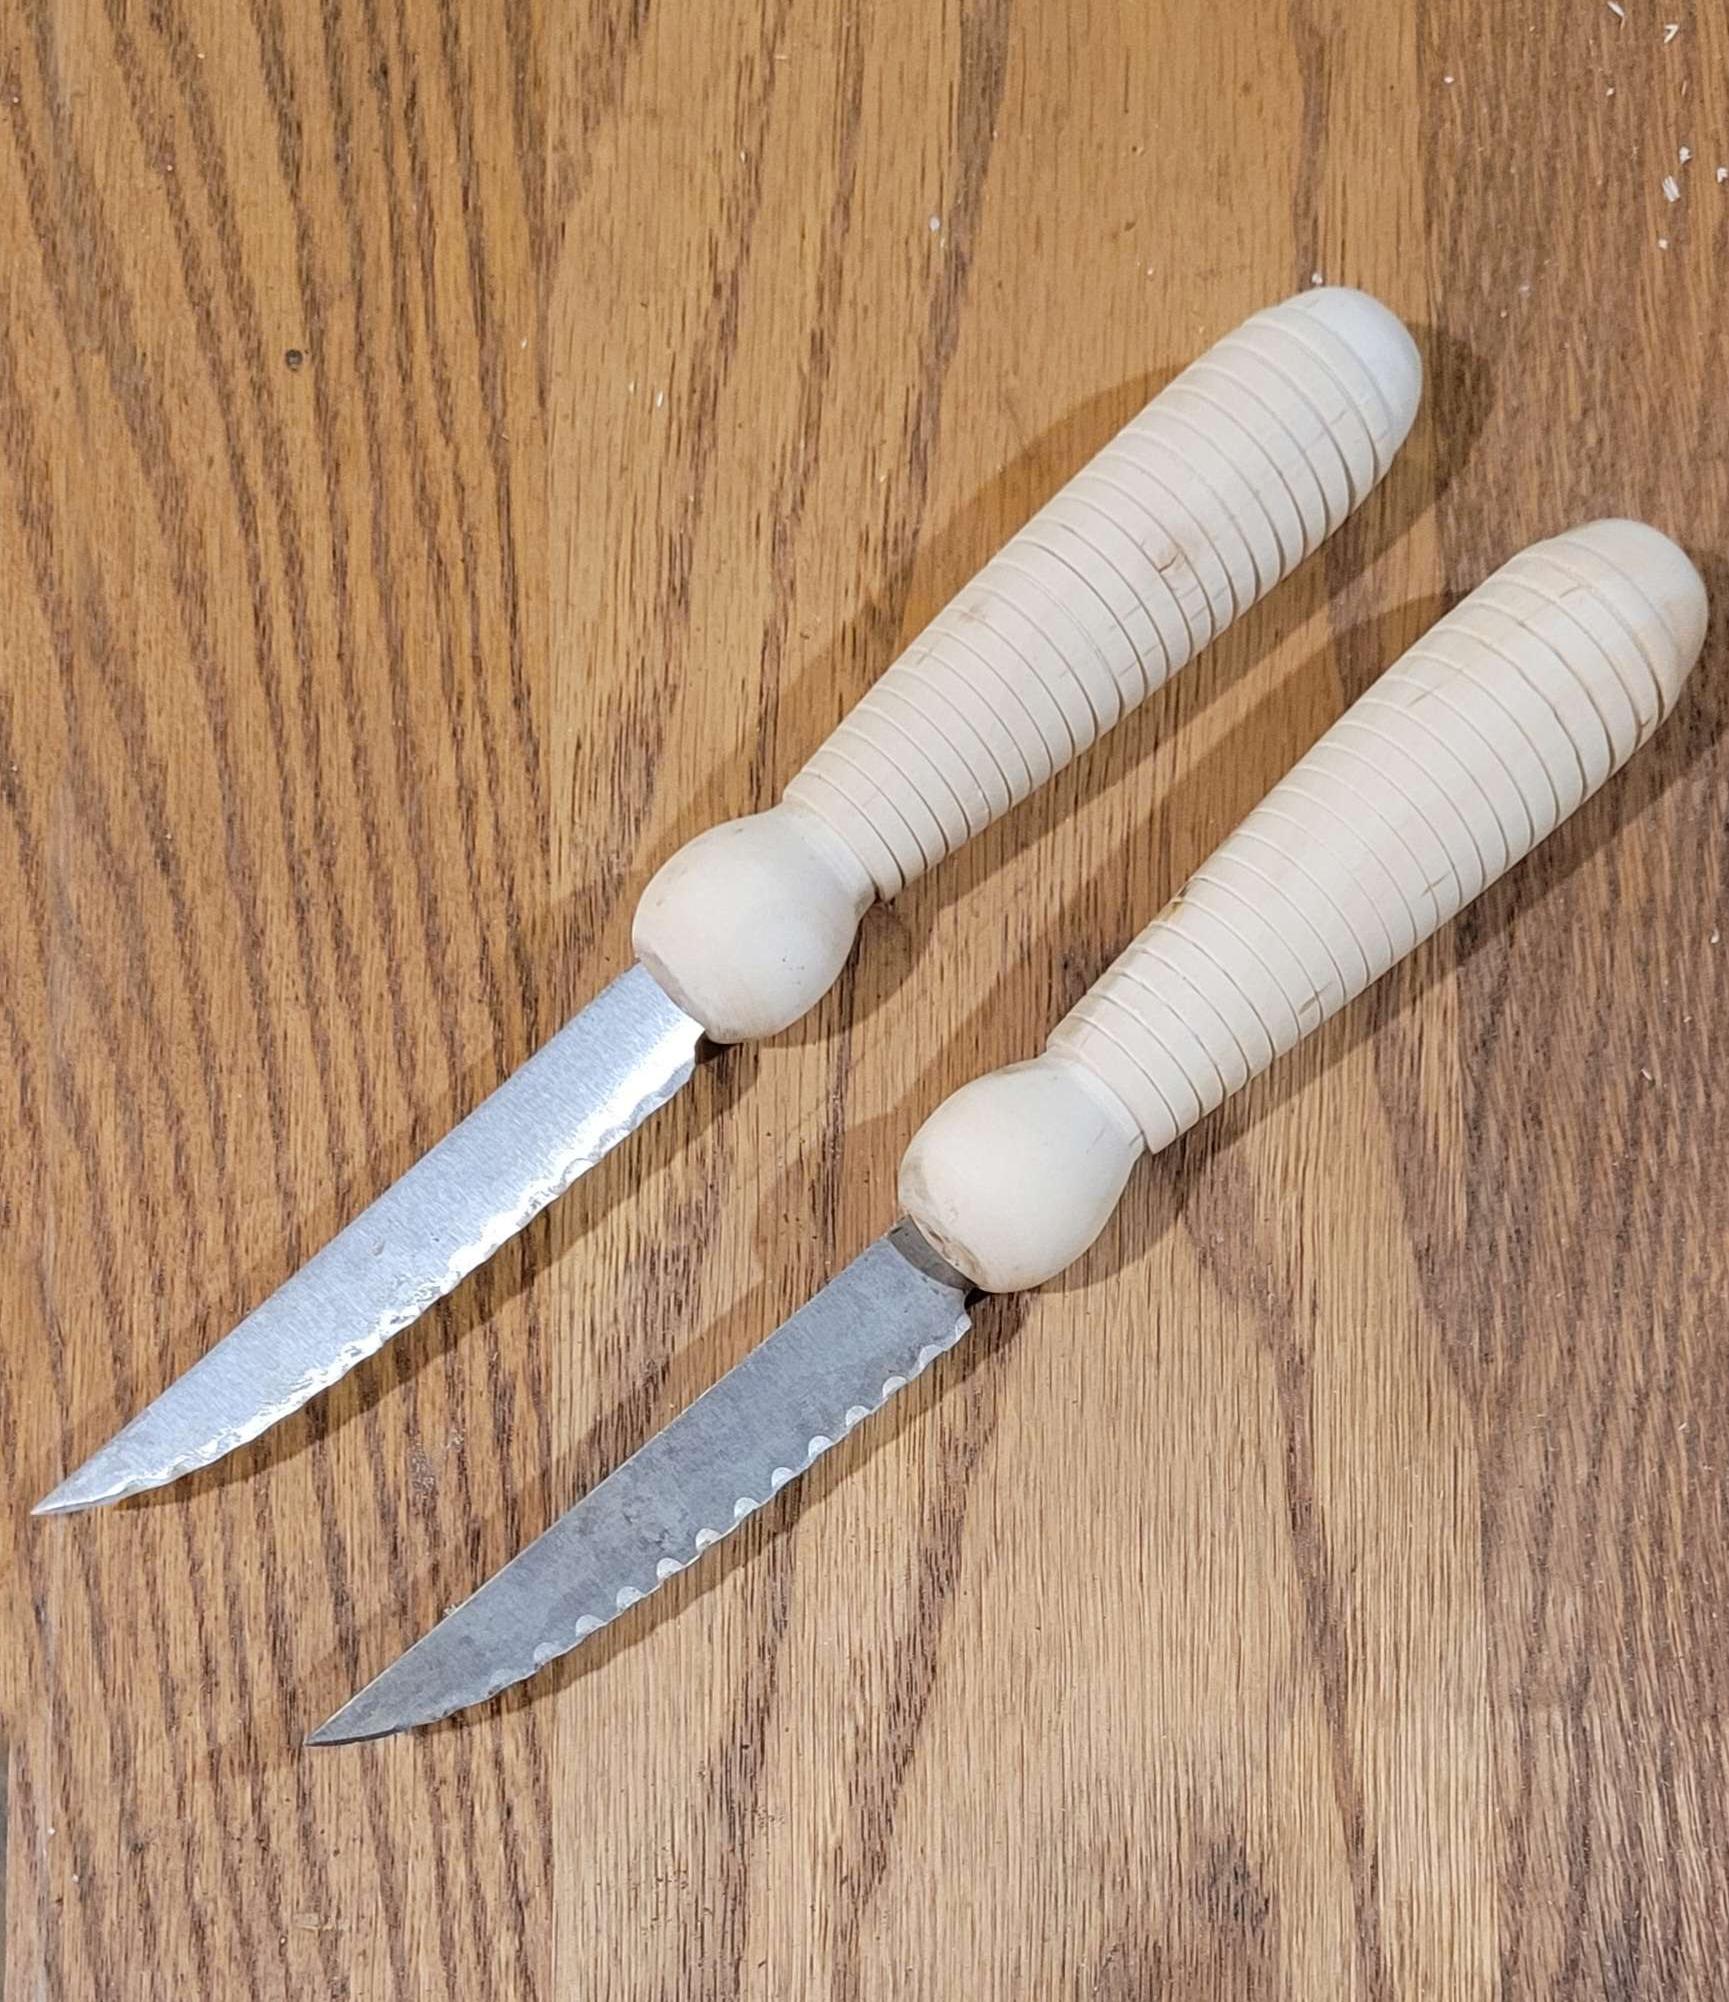 the two knives, unfinished